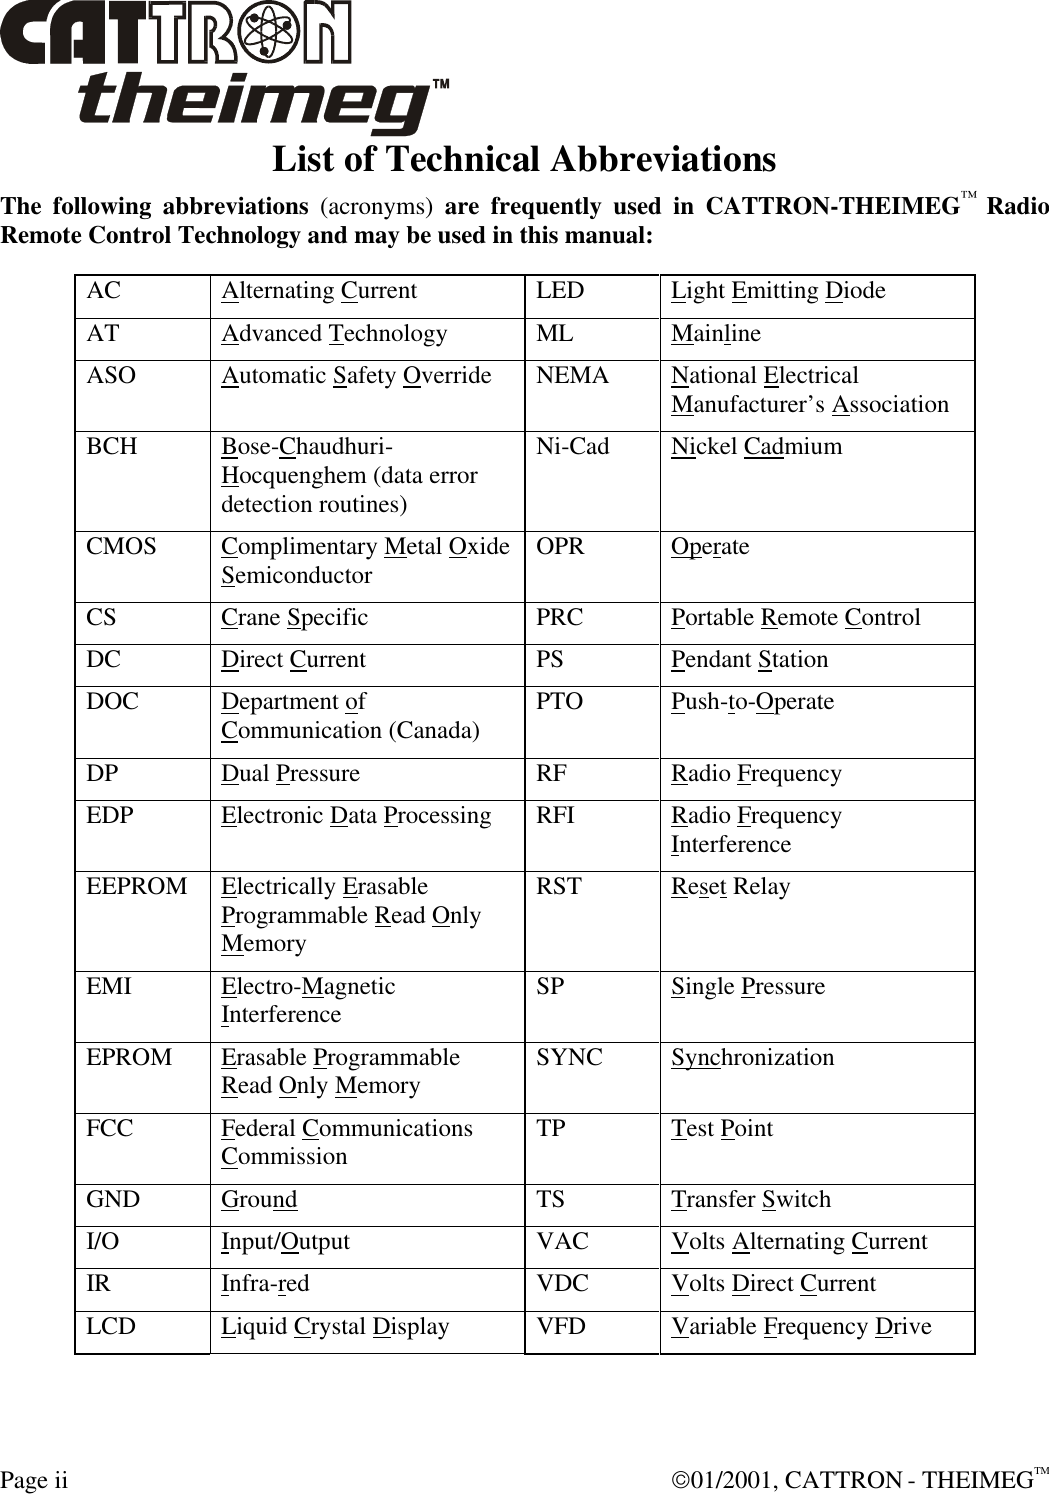  Page ii  01/2001, CATTRON - THEIMEGTM List of Technical Abbreviations The following abbreviations (acronyms) are frequently used in CATTRON-THEIMEG™ Radio Remote Control Technology and may be used in this manual:  AC Alternating Current LED Light Emitting Diode AT Advanced Technology ML Mainline ASO Automatic Safety Override NEMA National Electrical Manufacturer’s Association BCH Bose-Chaudhuri-Hocquenghem (data error detection routines) Ni-Cad Nickel Cadmium CMOS Complimentary Metal Oxide Semiconductor OPR Operate CS Crane Specific PRC Portable Remote Control DC Direct Current PS Pendant Station DOC Department of Communication (Canada) PTO Push-to-Operate  DP Dual Pressure RF Radio Frequency EDP Electronic Data Processing RFI Radio Frequency Interference EEPROM Electrically Erasable Programmable Read Only Memory RST Reset Relay EMI Electro-Magnetic Interference SP Single Pressure EPROM Erasable Programmable Read Only Memory SYNC Synchronization FCC Federal Communications Commission TP Test Point GND Ground TS Transfer Switch I/O Input/Output VAC Volts Alternating Current  IR  Infra-red VDC Volts Direct Current  LCD Liquid Crystal Display VFD Variable Frequency Drive  